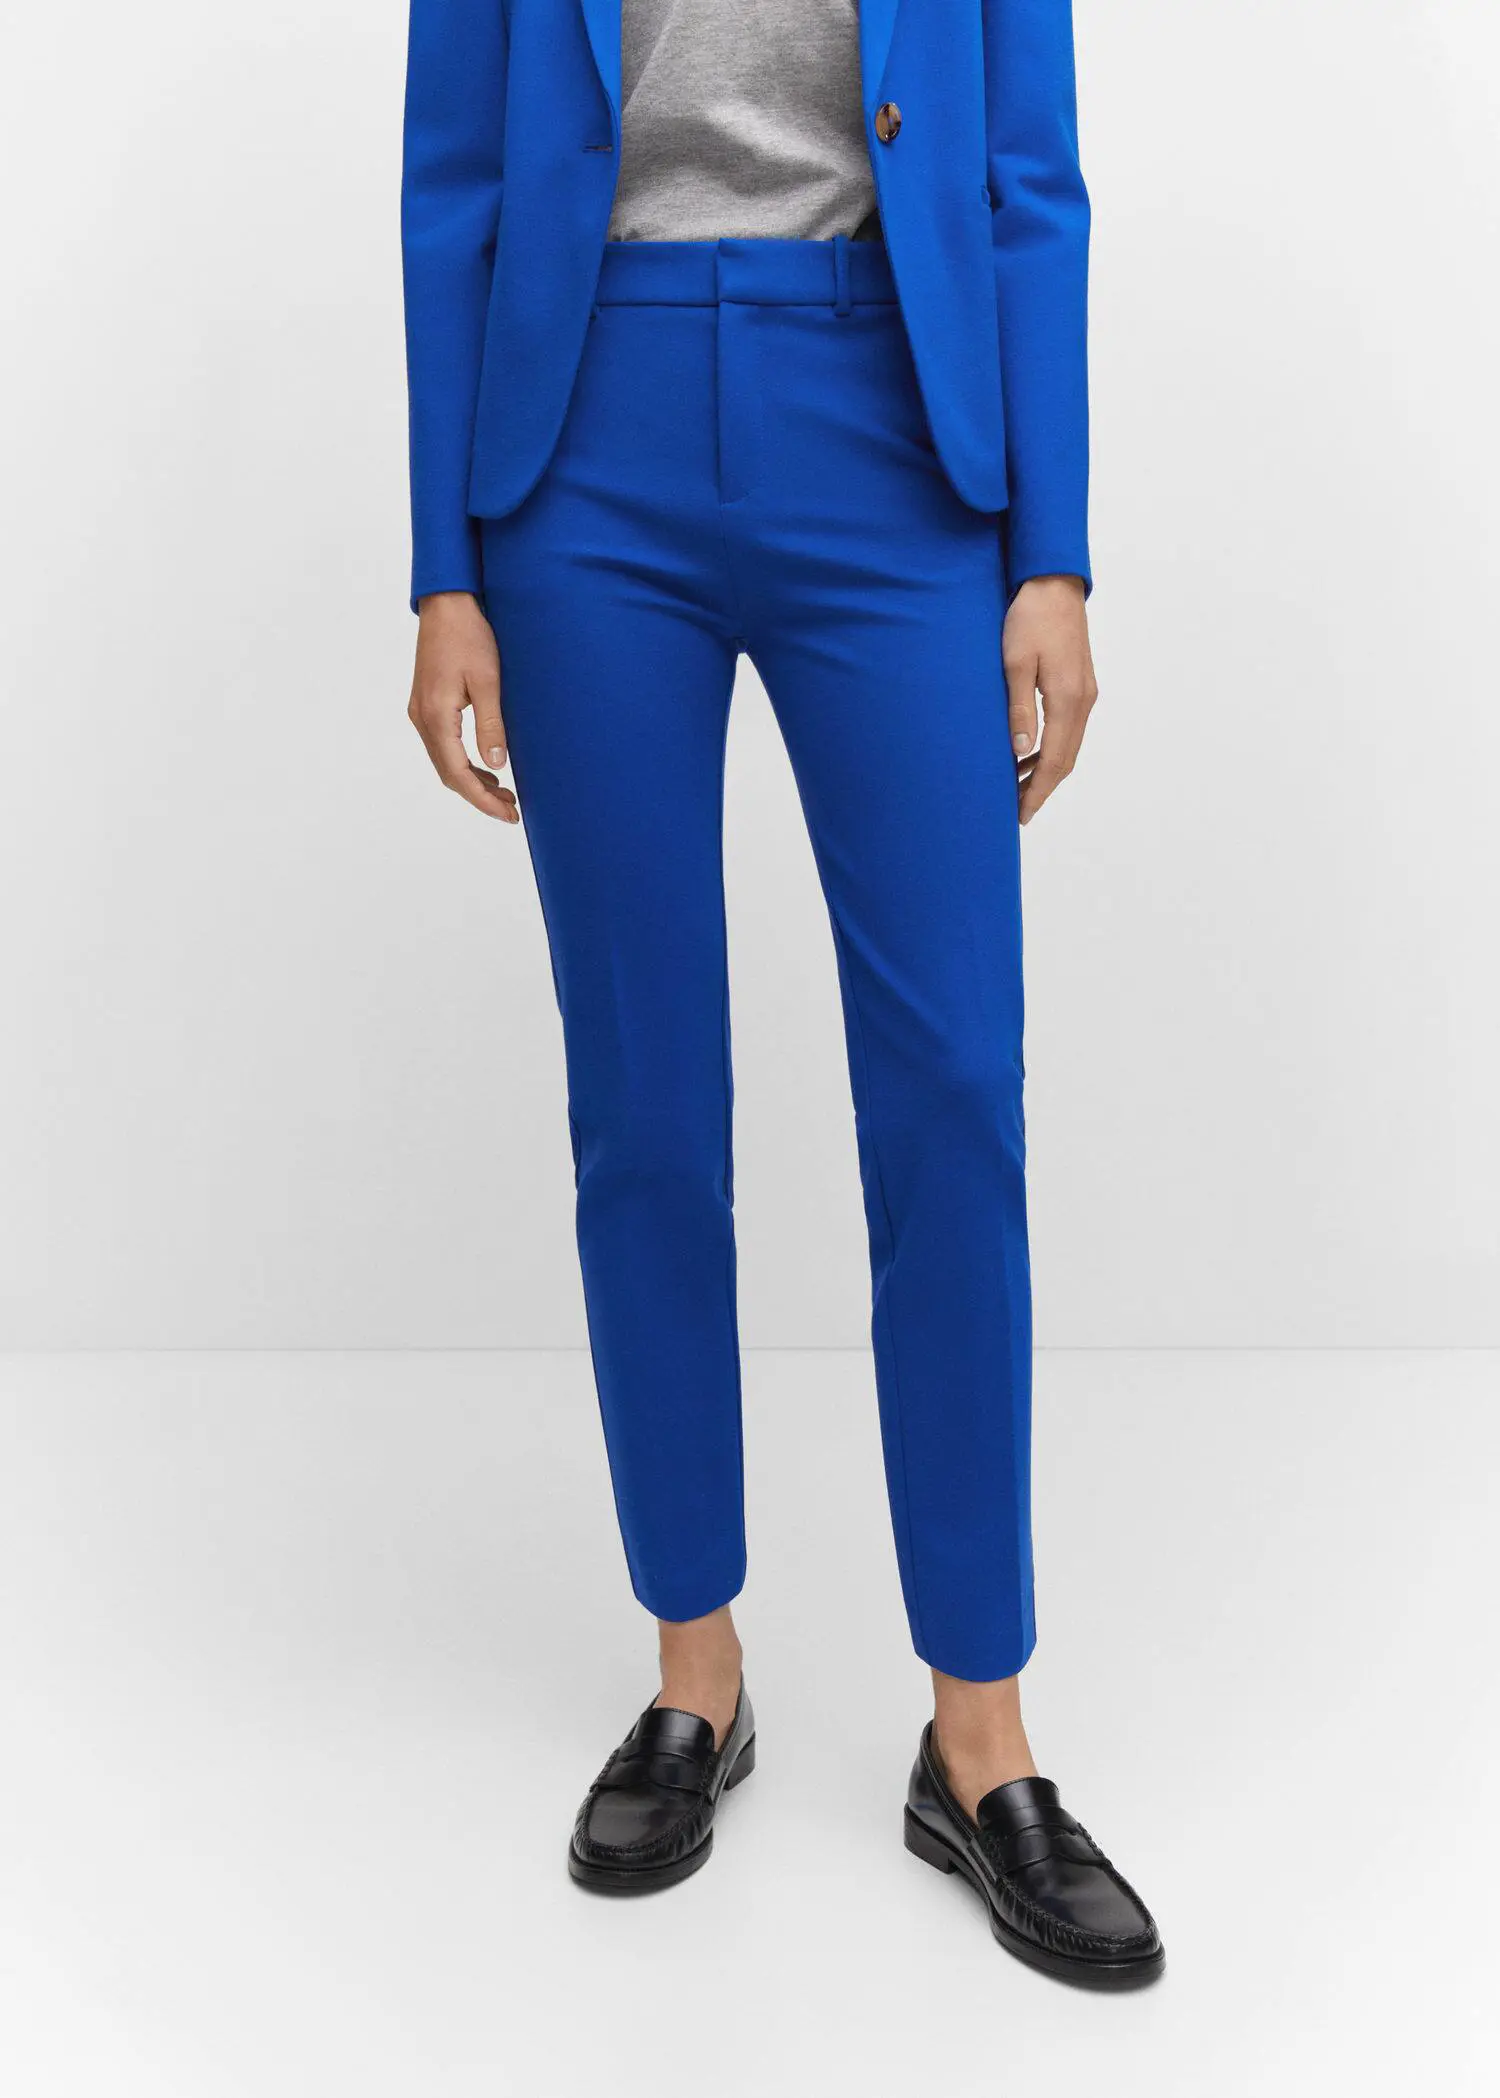 Mango Rome-knit straight pants. a woman wearing a blue suit and black shoes. 